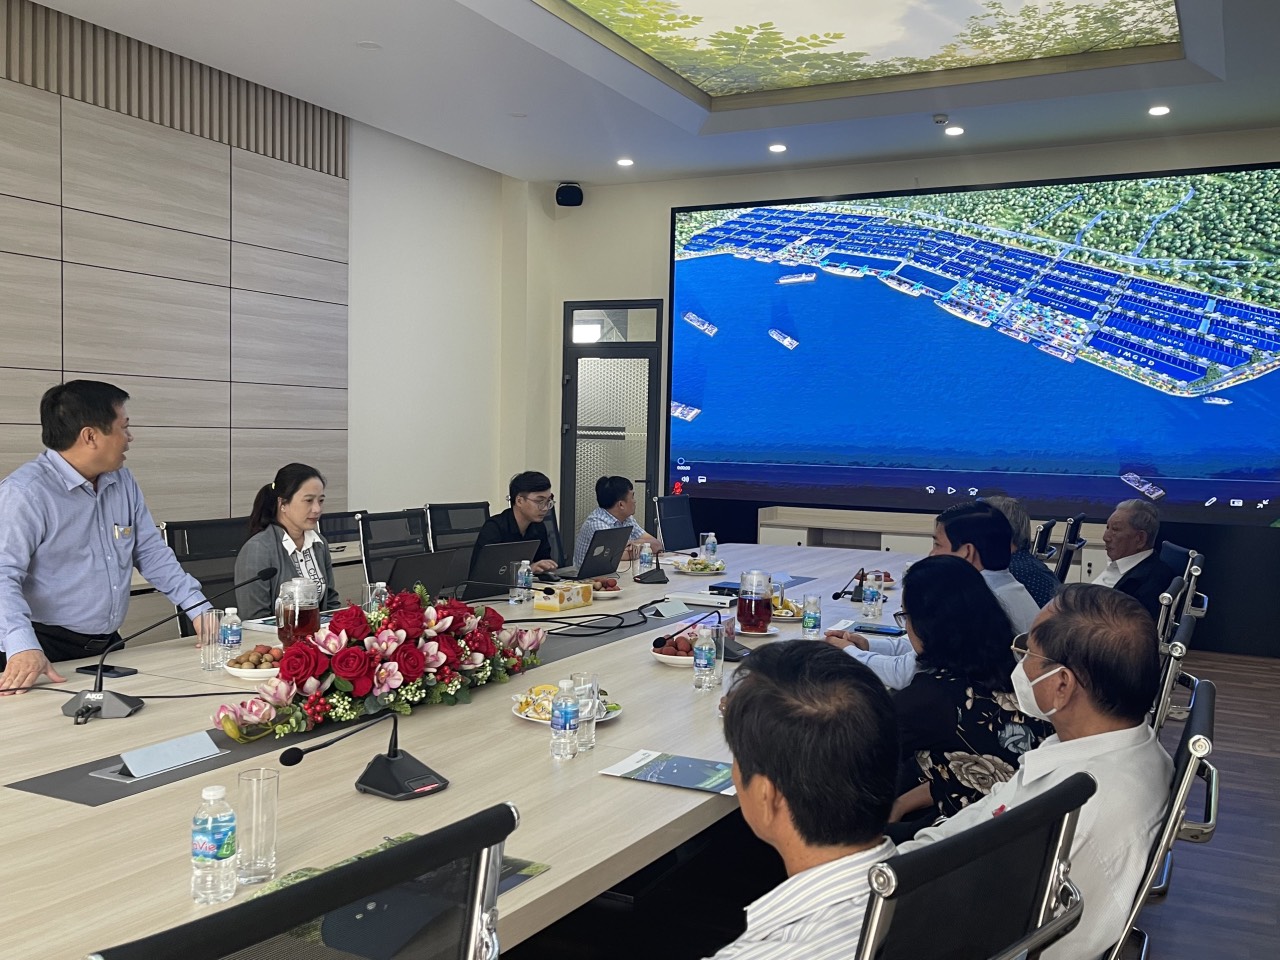 welcoming the delegation of leaders of can duoc district and former leaders of long an province to visit and work at phuoc dong wharf industrial park